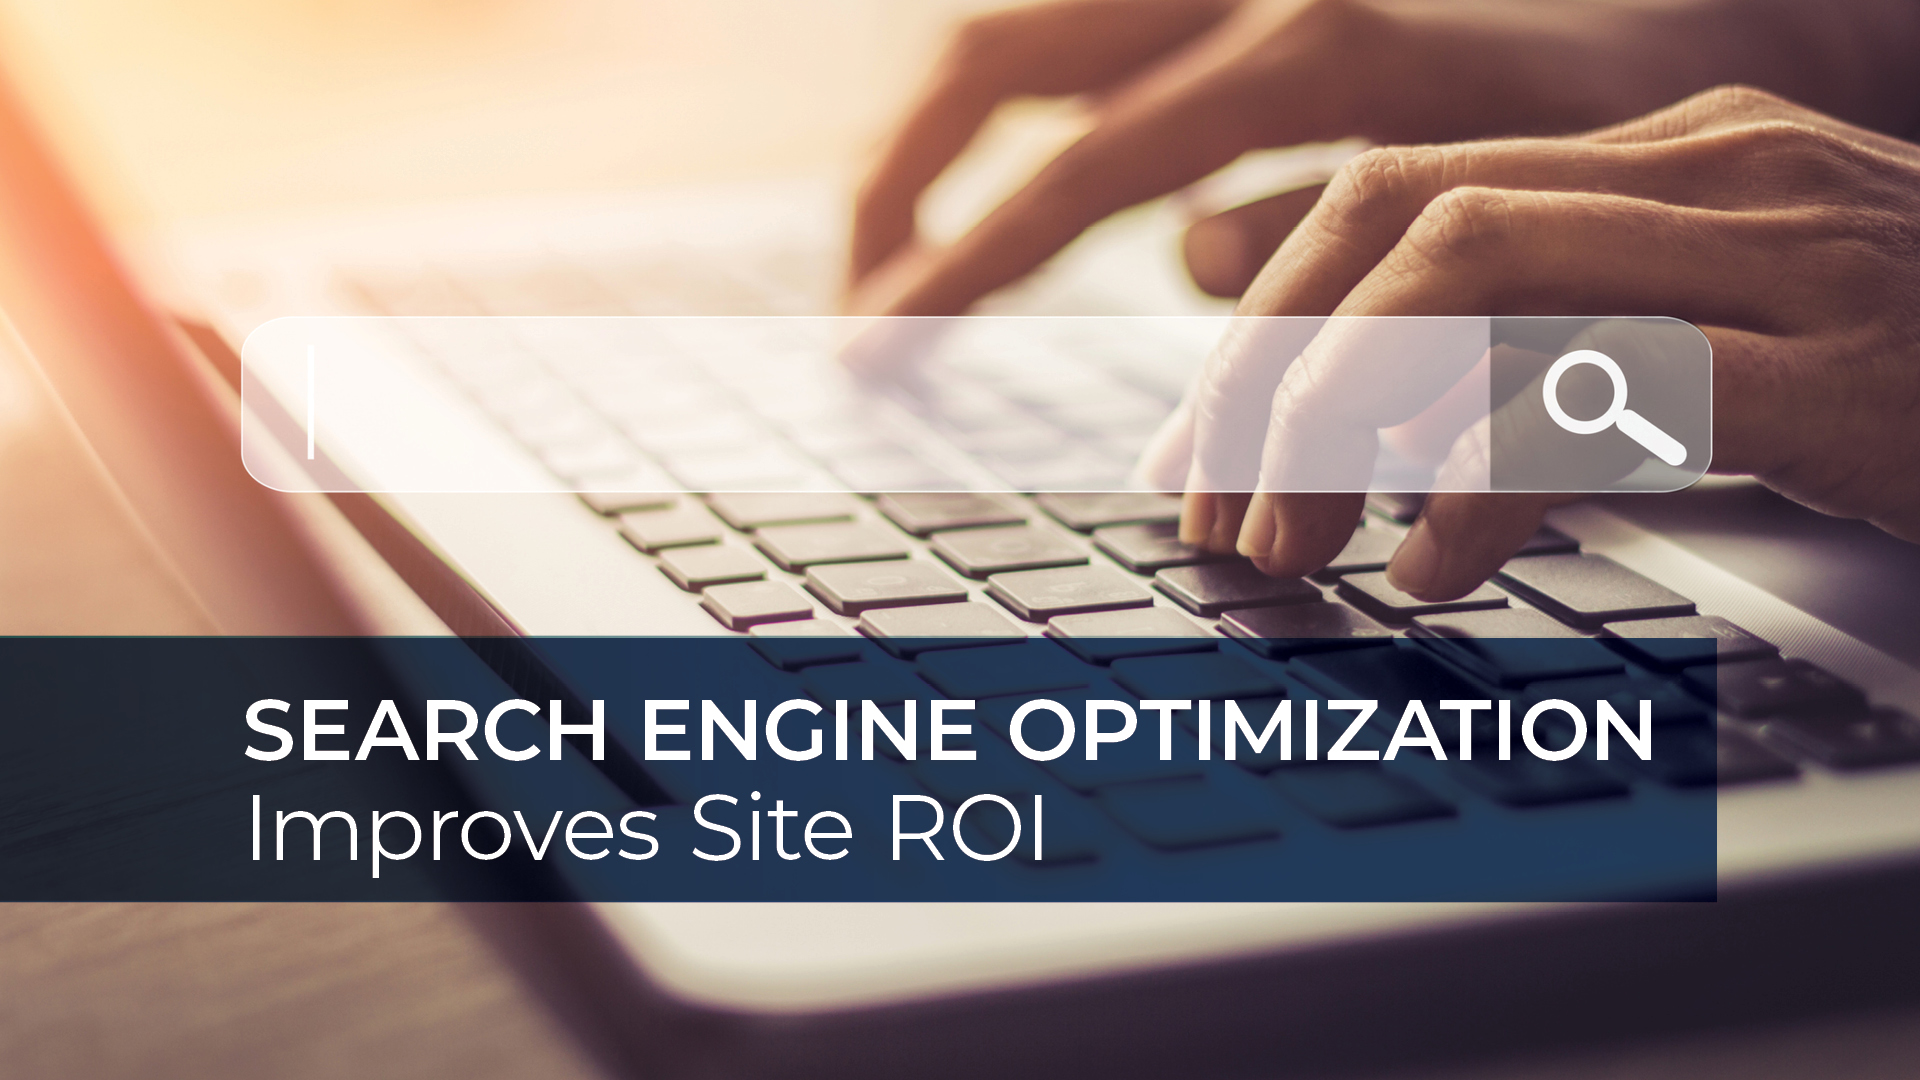 How Search Engine Optimization Can Improve Your ROI